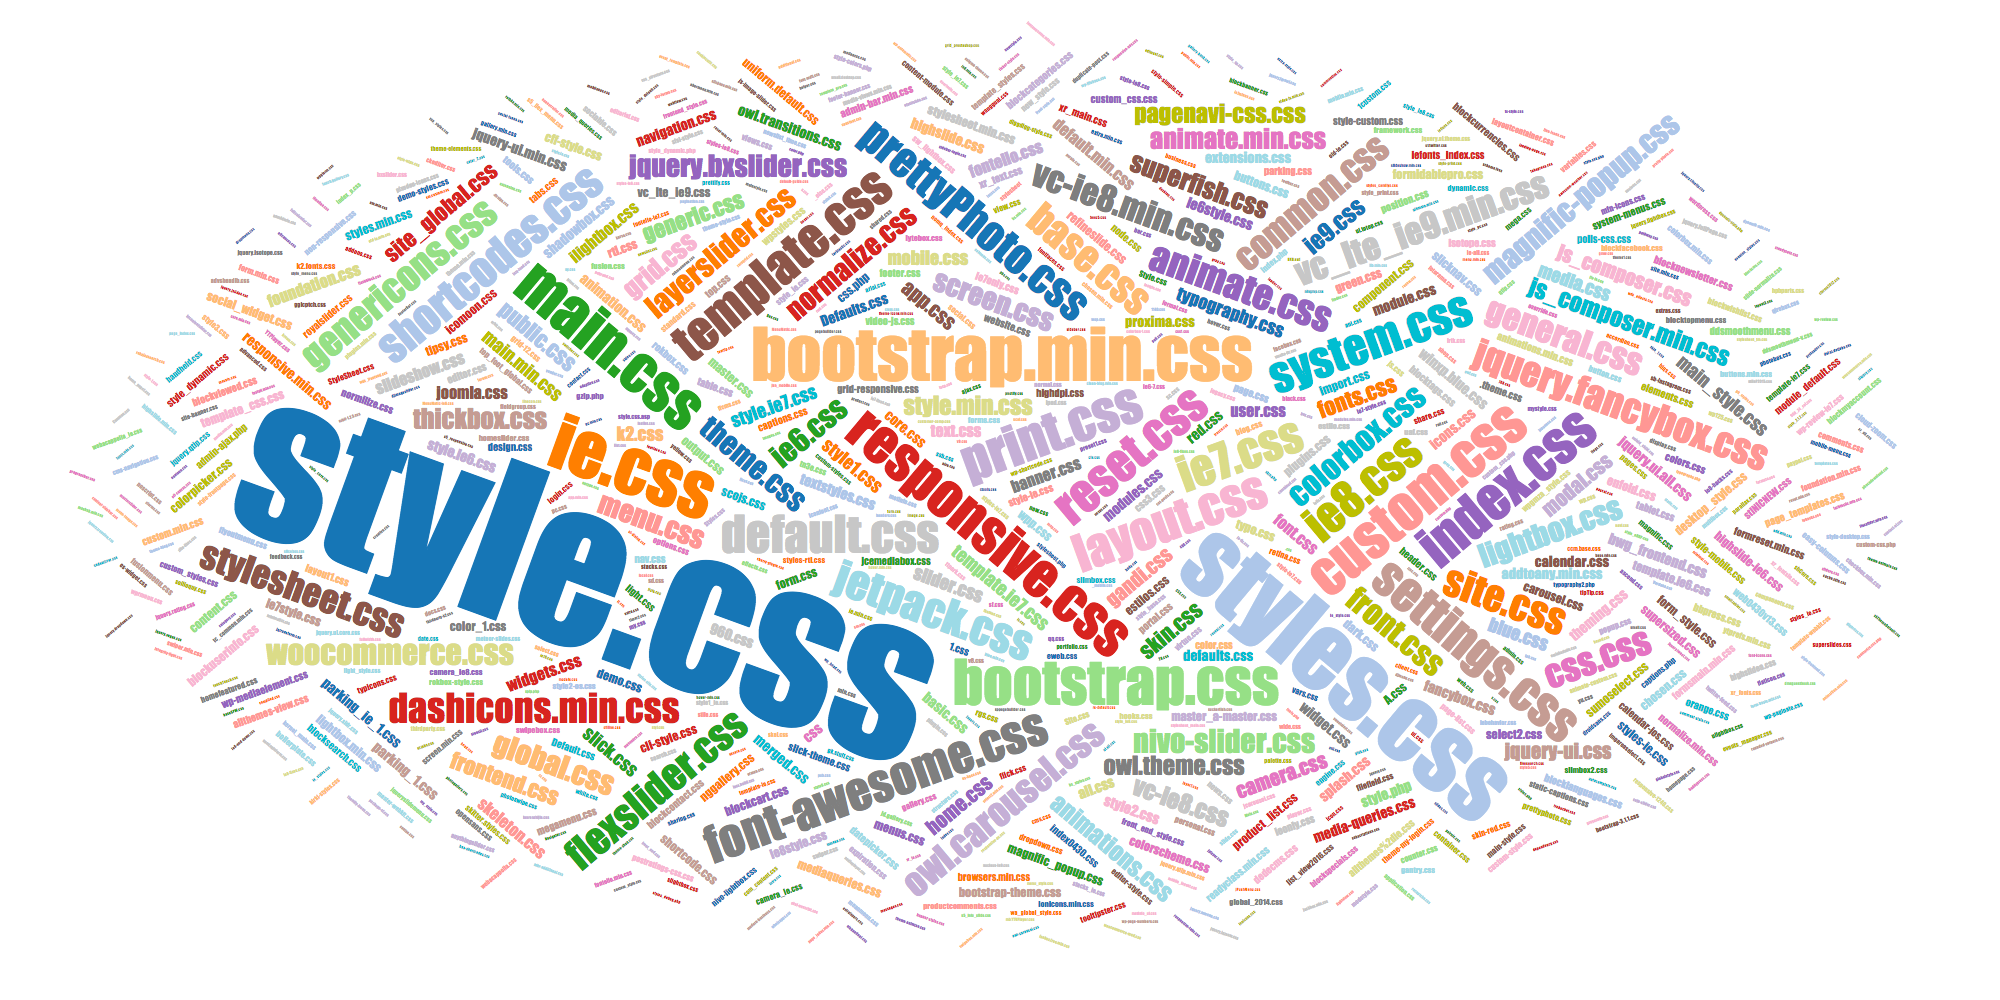 Popular names of CSS files style.css, font-awesome.min.css, etc.